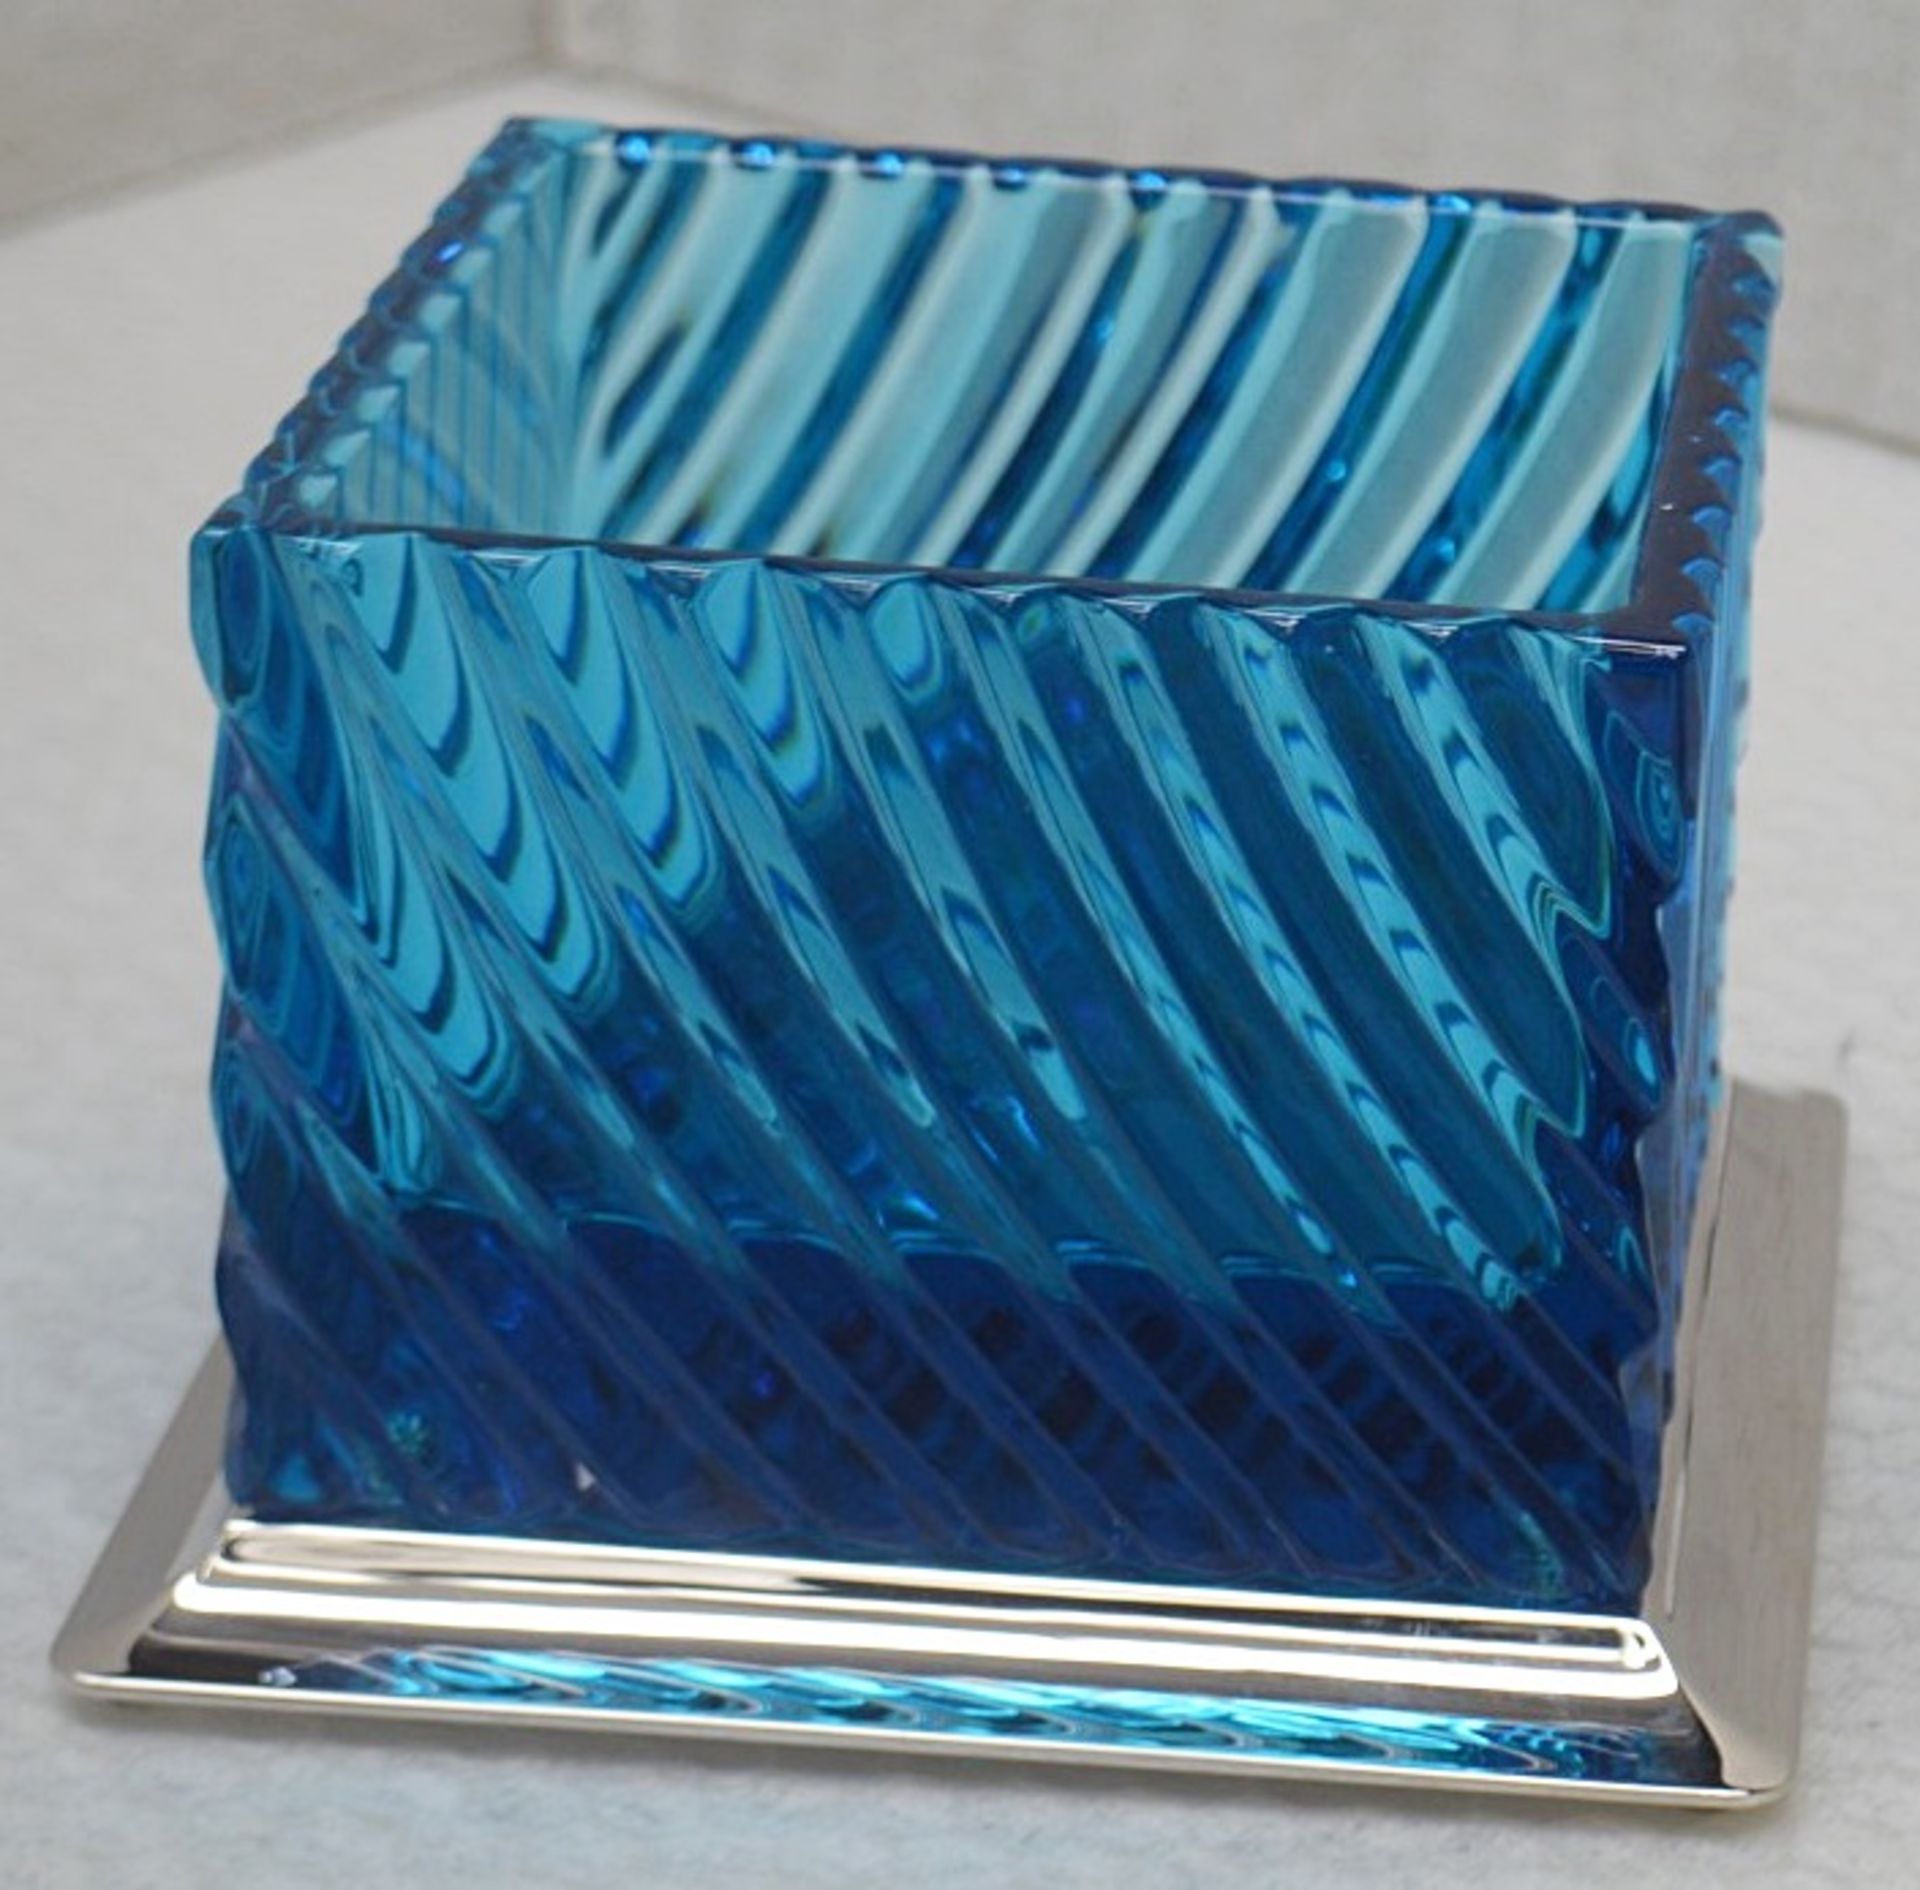 1 x BALDI 'Home Jewels' Italian Hand-crafted Artisan Crystal Box In Blue & Yellow, With A - Image 3 of 5